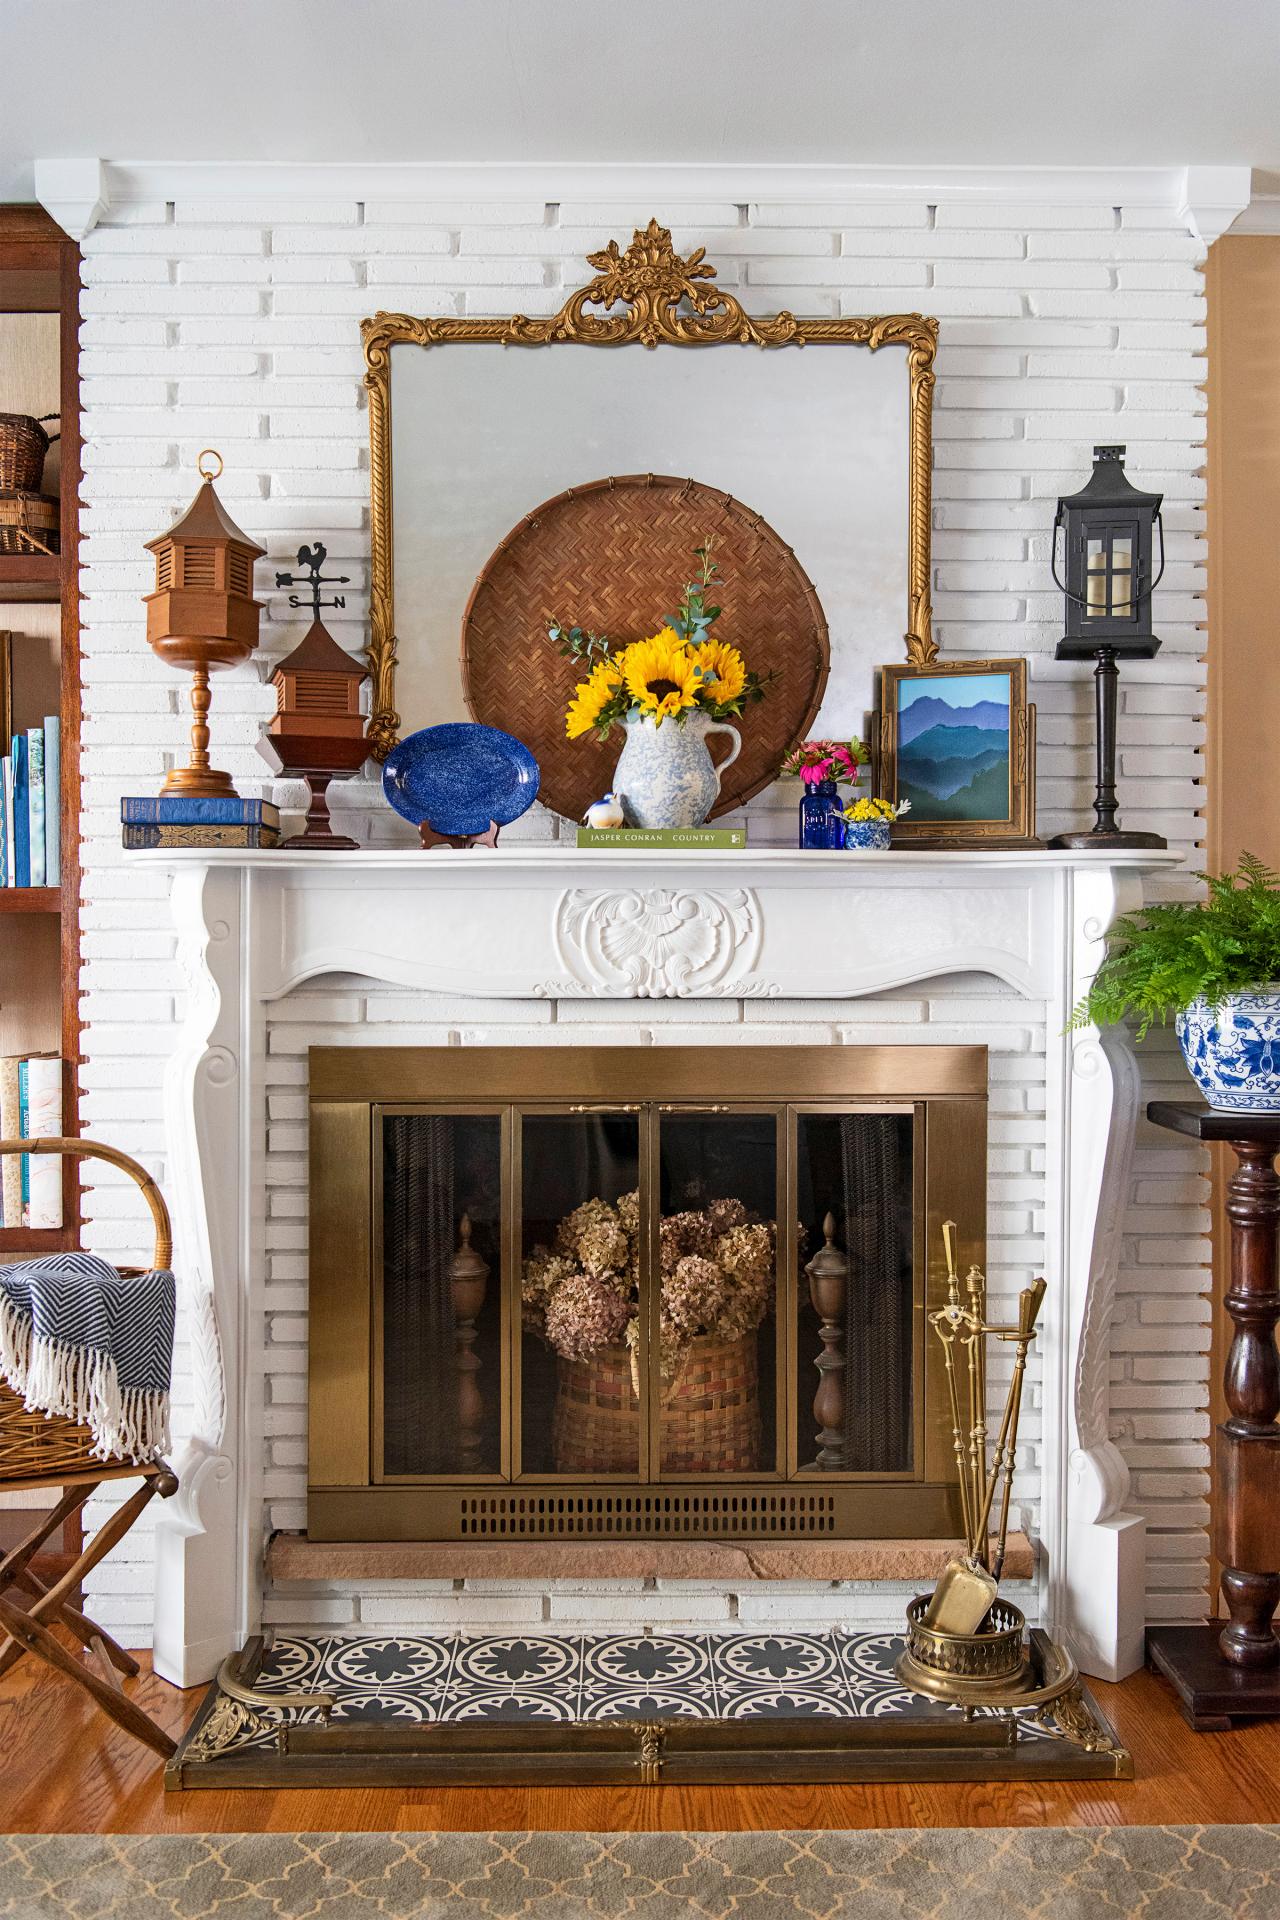 40 Fireplace Mantel Decorating Ideas How To Decorate A Year Round Hgtv